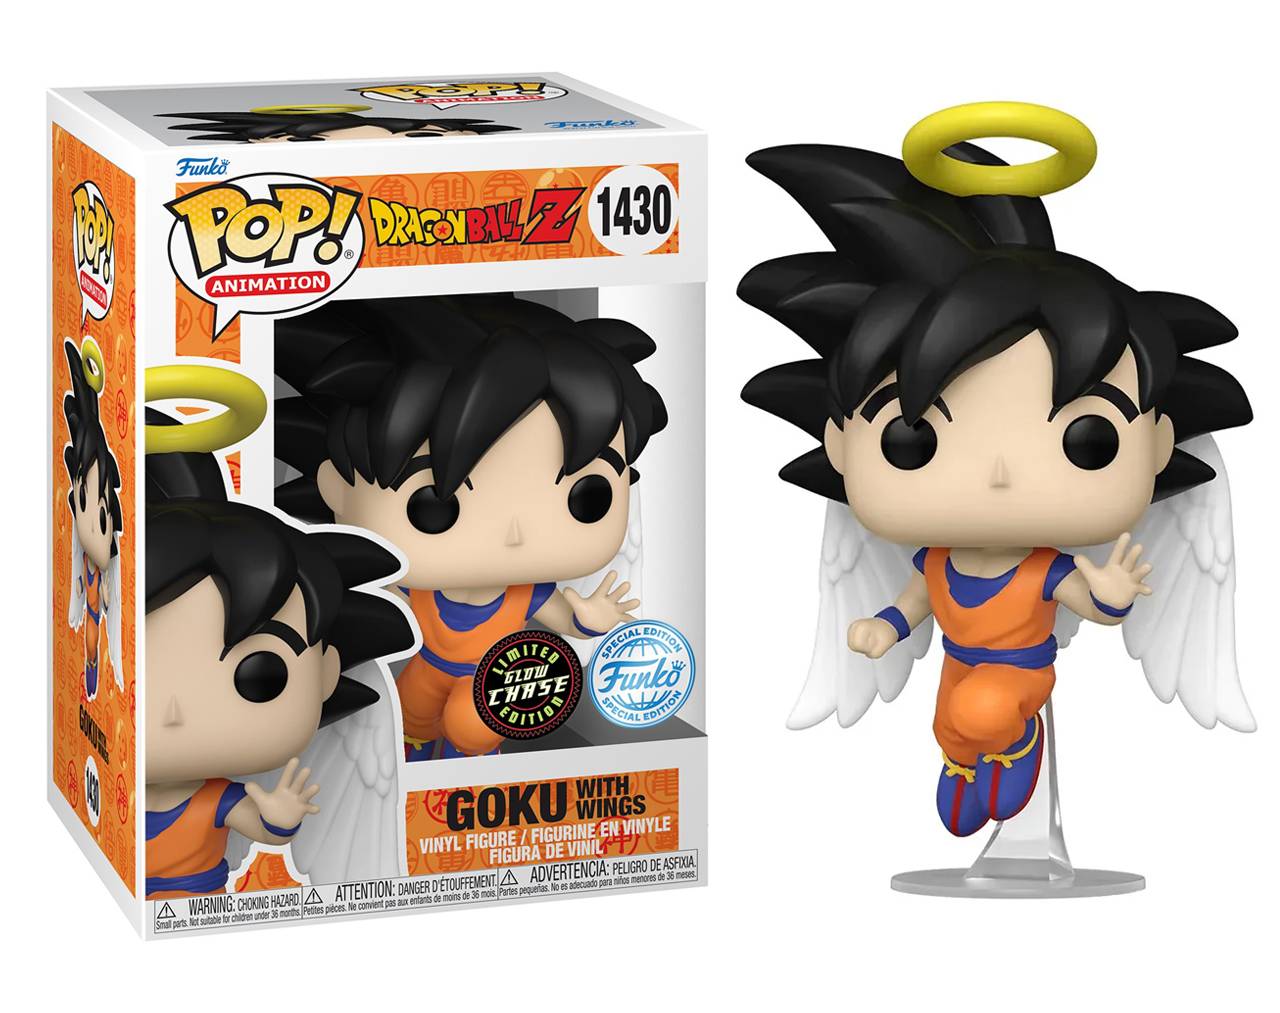 Goku with Wings (Limited Chase Glow Edition) - Dragon Ball Z Pop! Vinyl